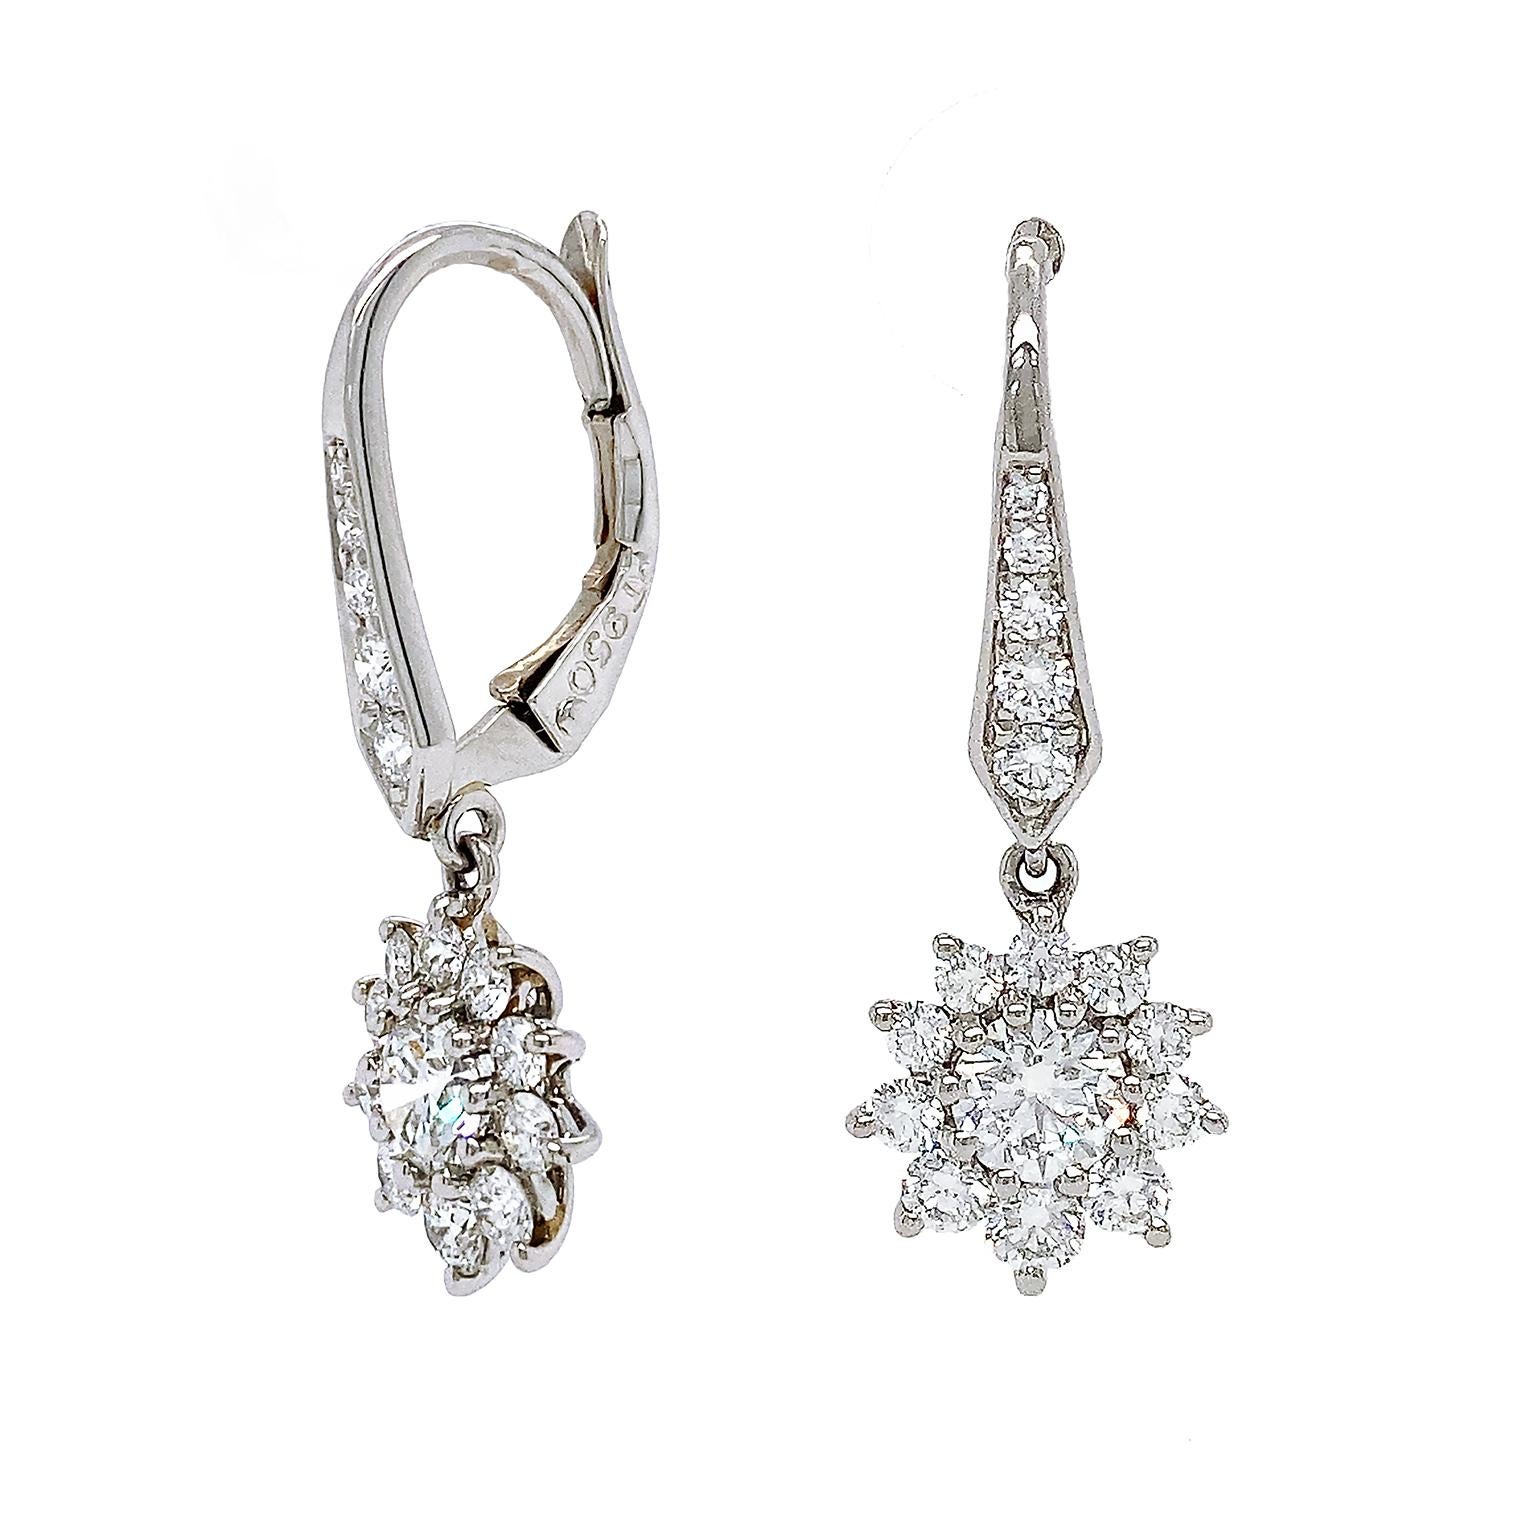 These drop earrings portray diamonds as stars. VS1-VVS2 clarity round brilliant cut diamonds are coupled with 18k white gold for these earrings. Diamonds in the hooks lead toward the drop of smaller ones that frame a larger diamond in the center in